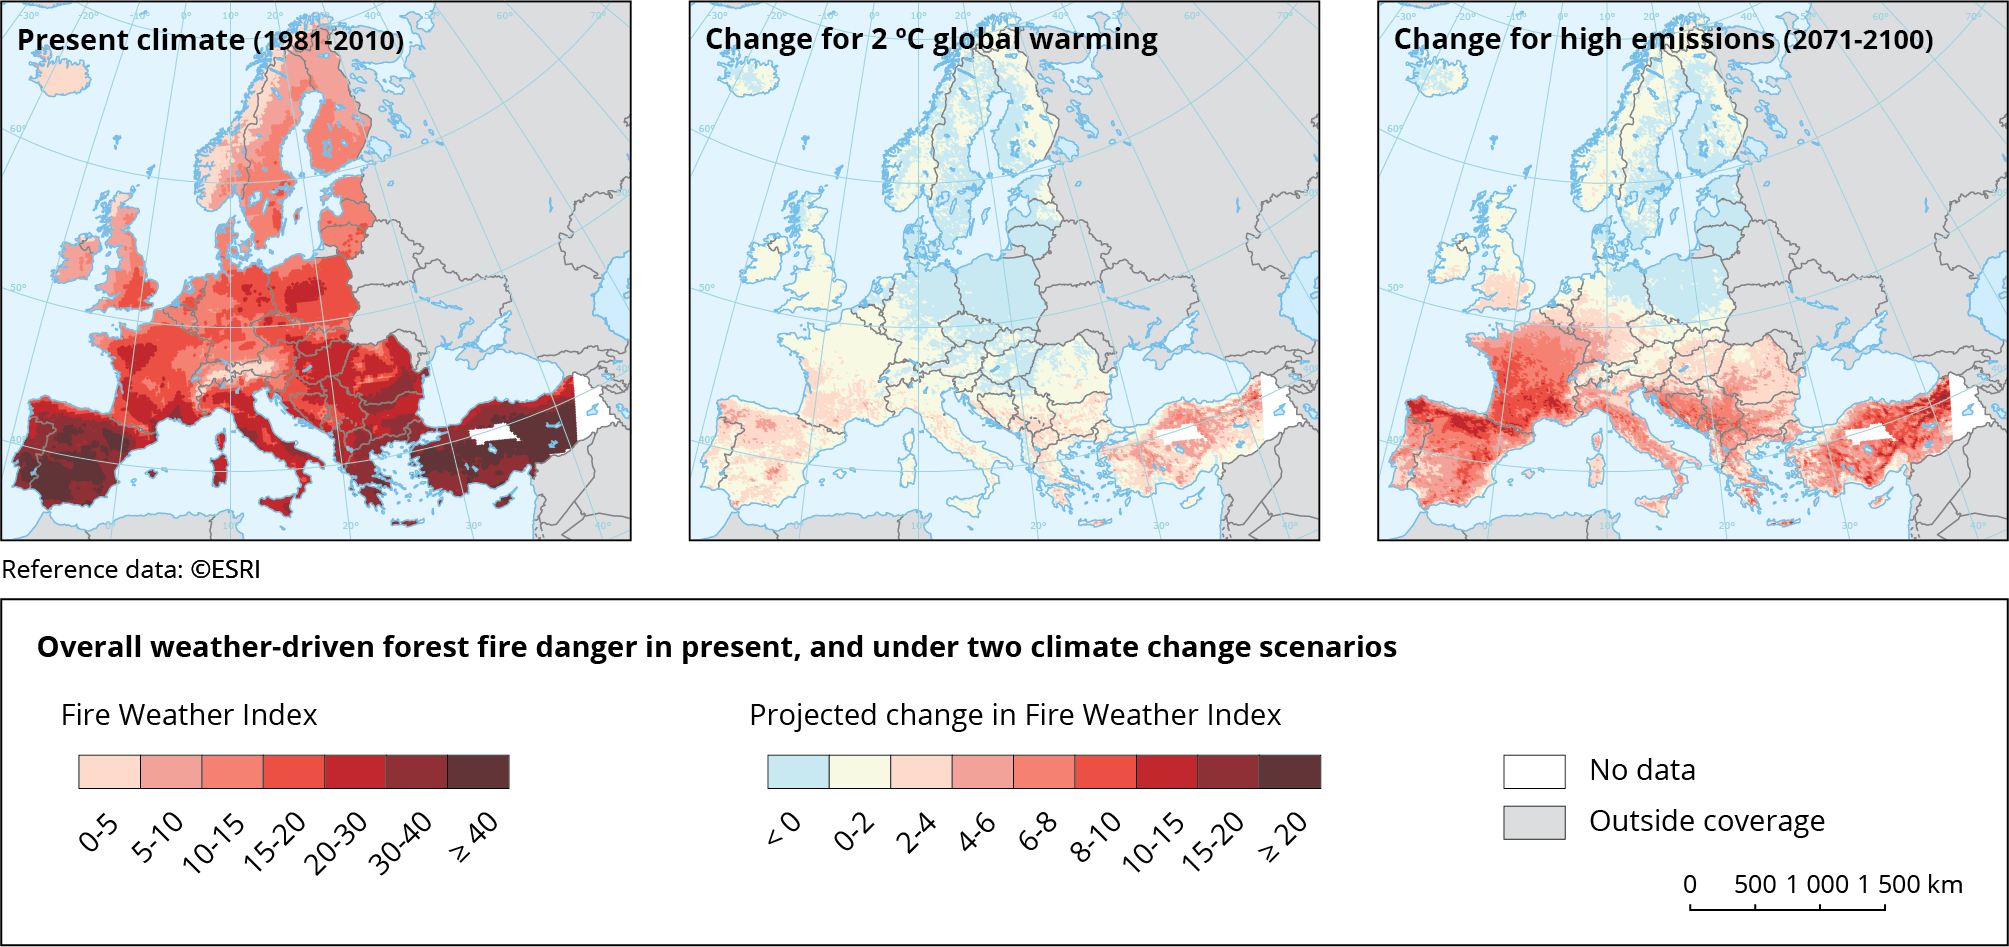 Overall weather-driven forest fire danger in the present, and under two climate change scenarios